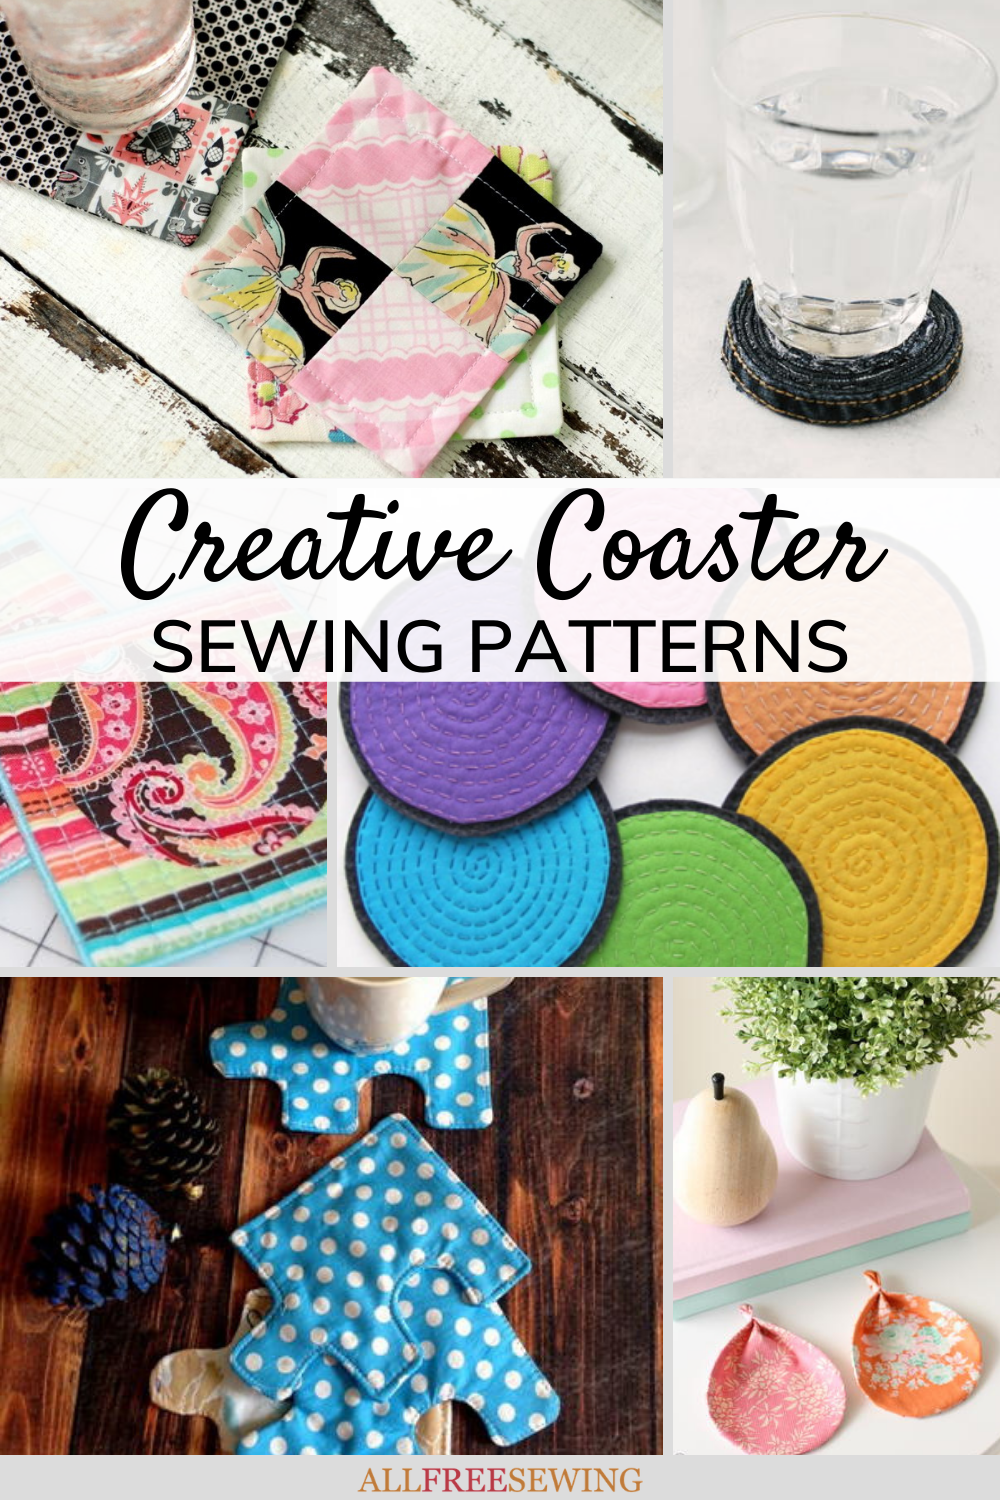 25+ Scrap Fabric Projects to Use Up Your Stash! - Positively